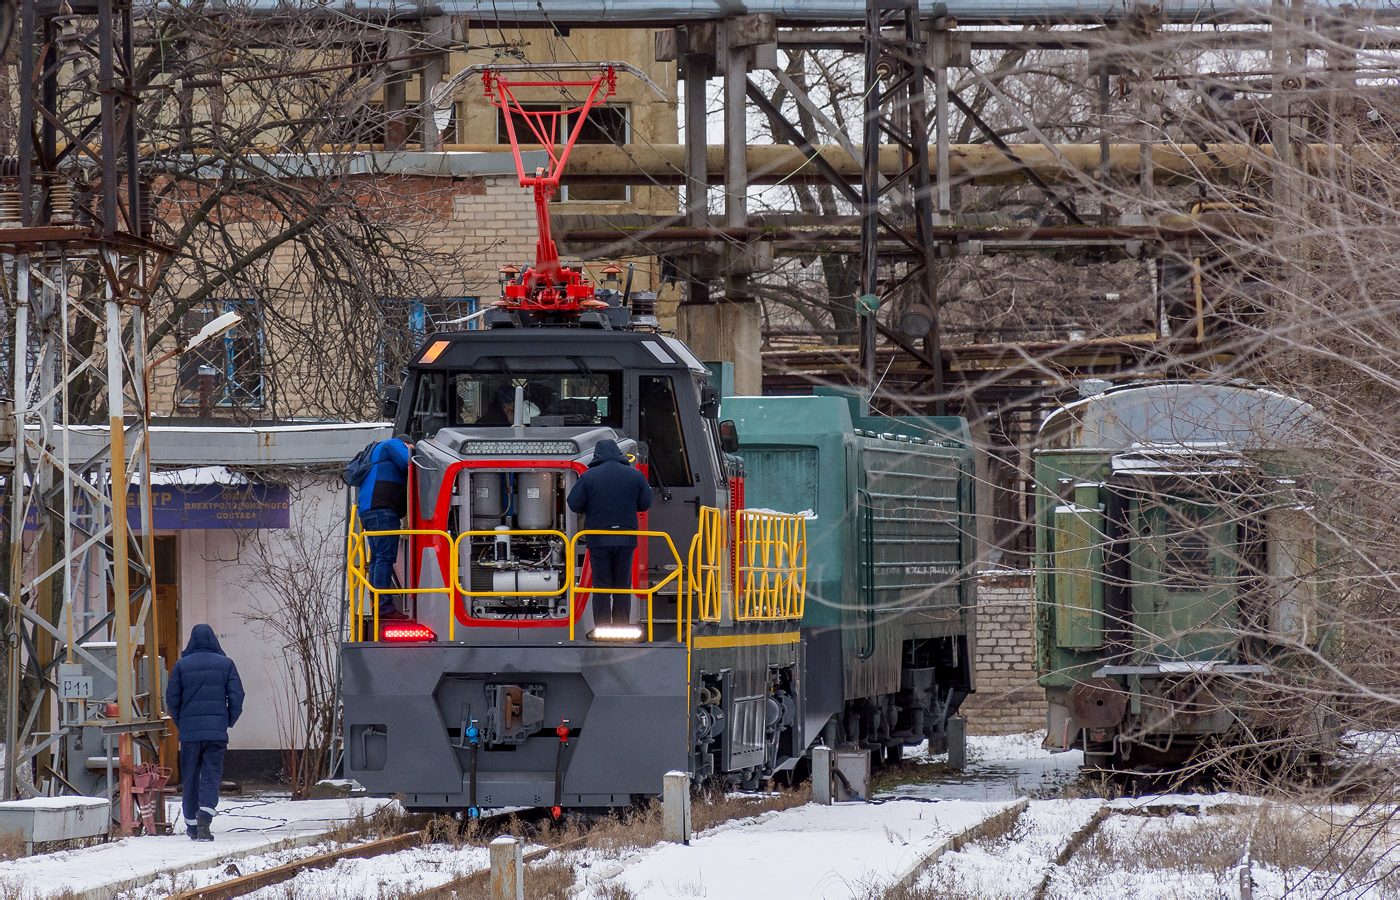 EMKA2 shunting catenary and battery-powered locomotive in RZD’s livery at the Novocherkassk Electric Locomotive Plant, January 2023